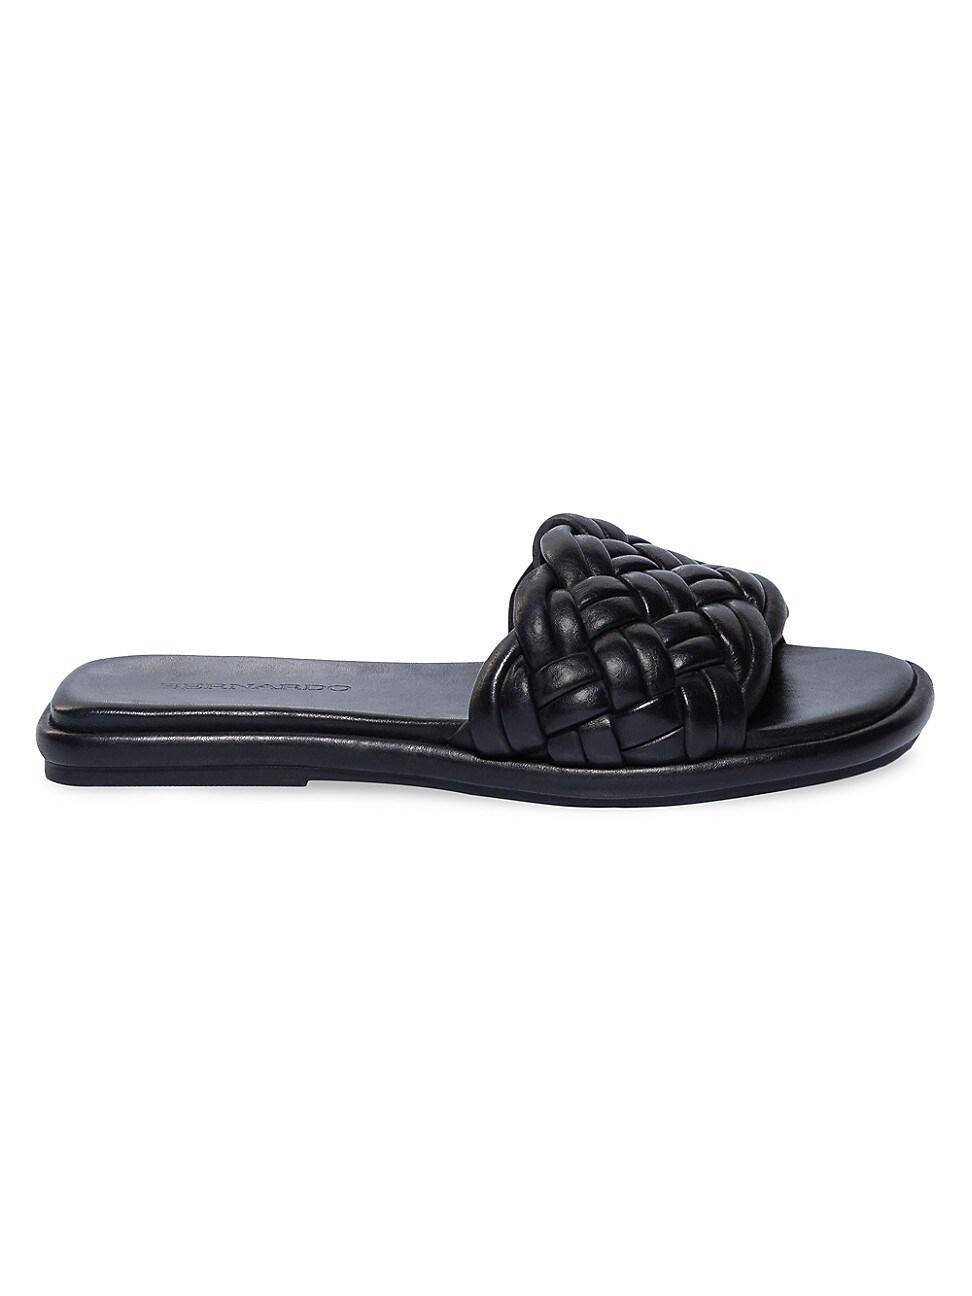 Womens Troy Leather Woven Sandals Product Image